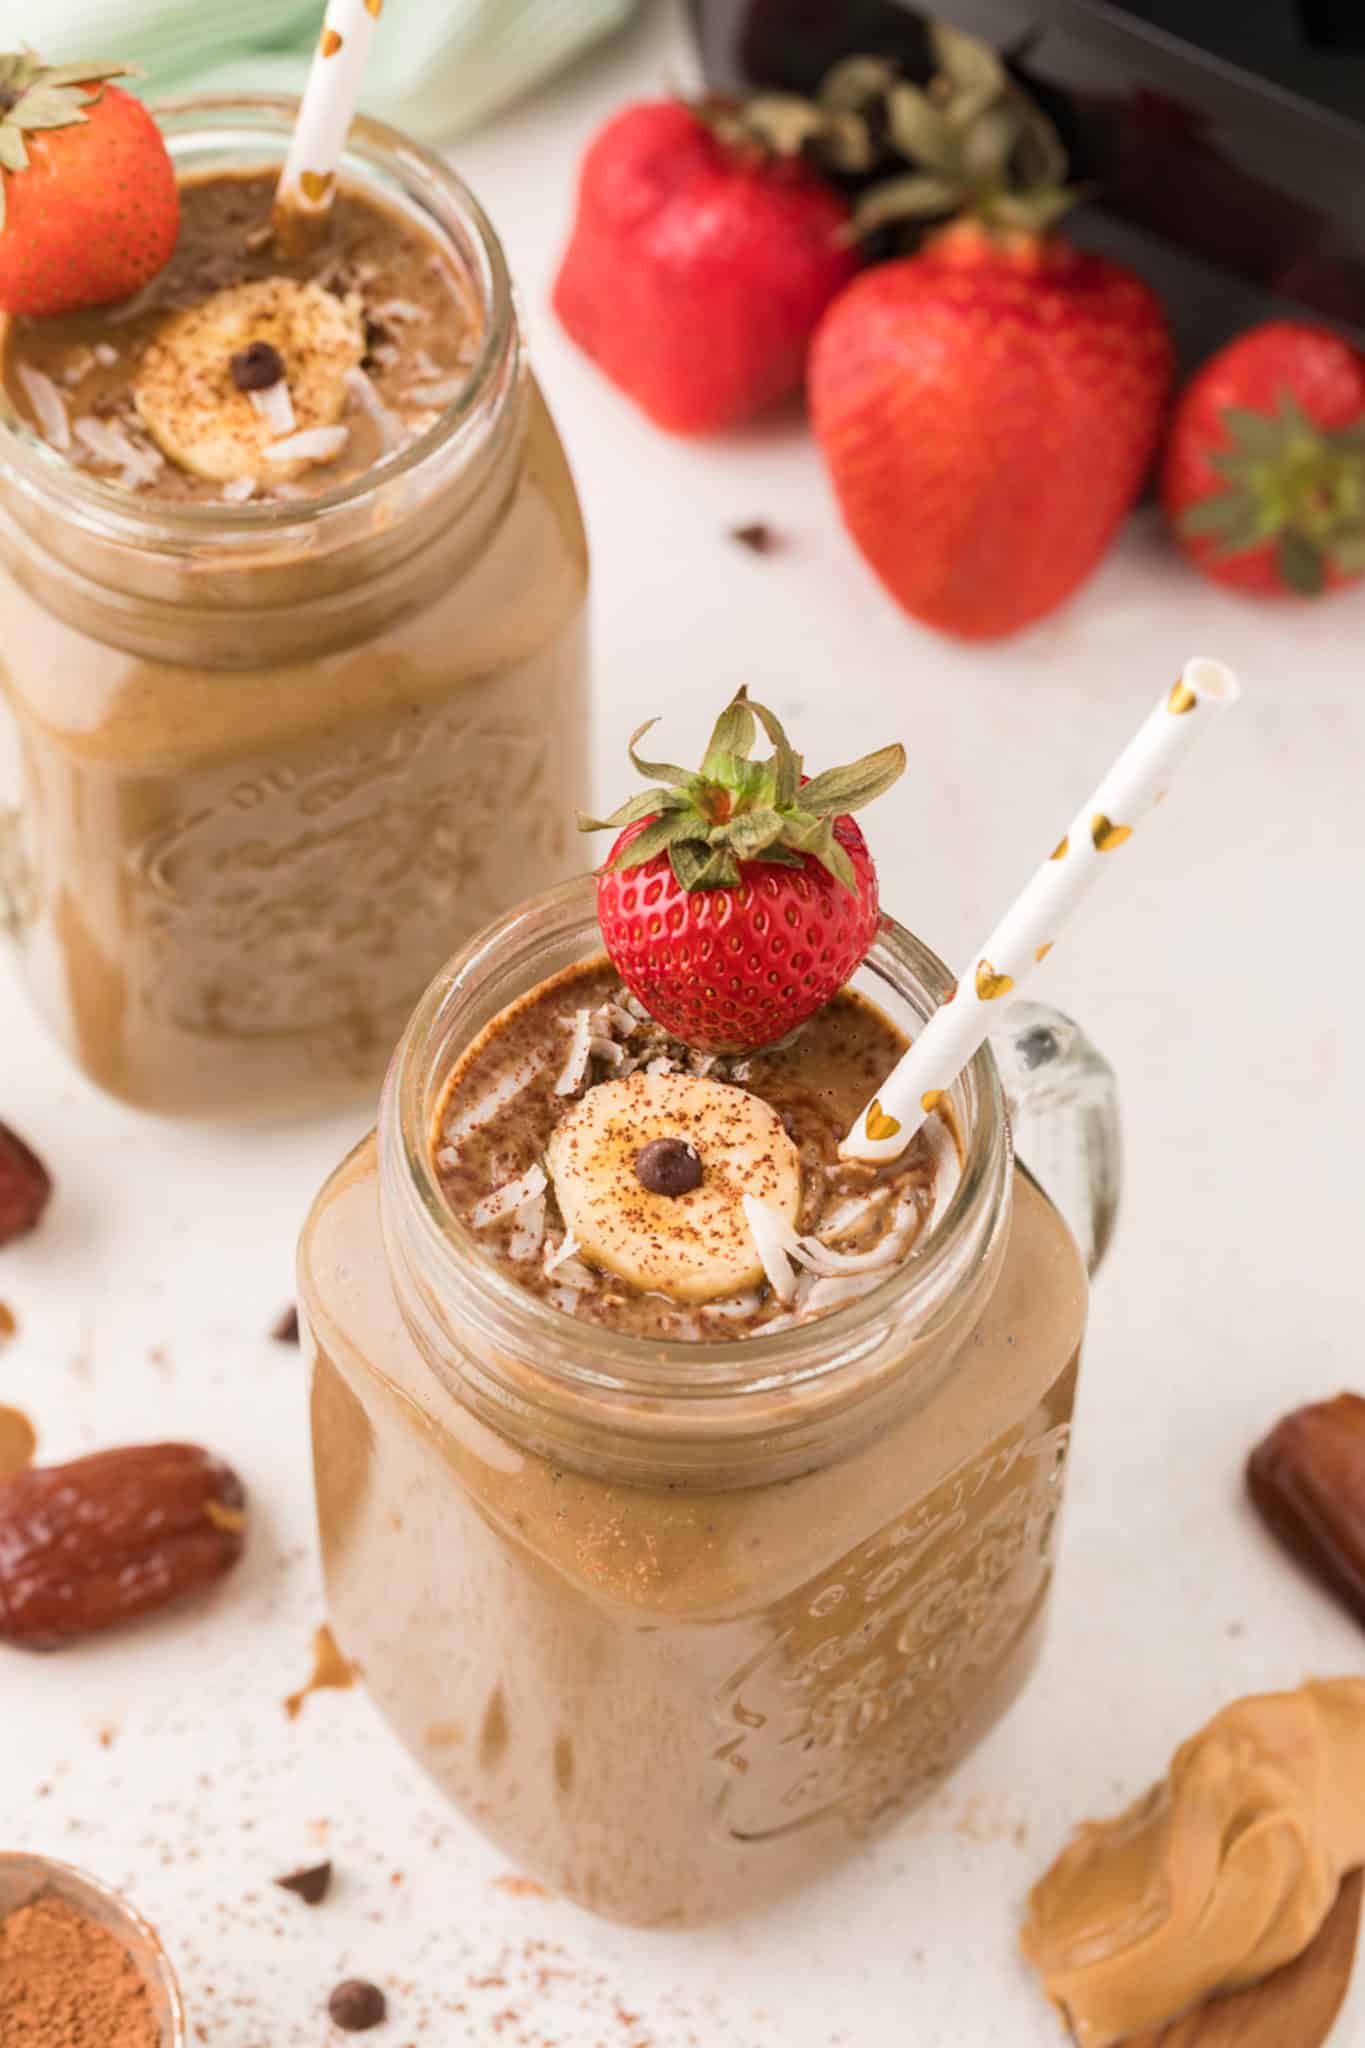 chocolate weight gain smoothie with strawberries and banana served in a jar.